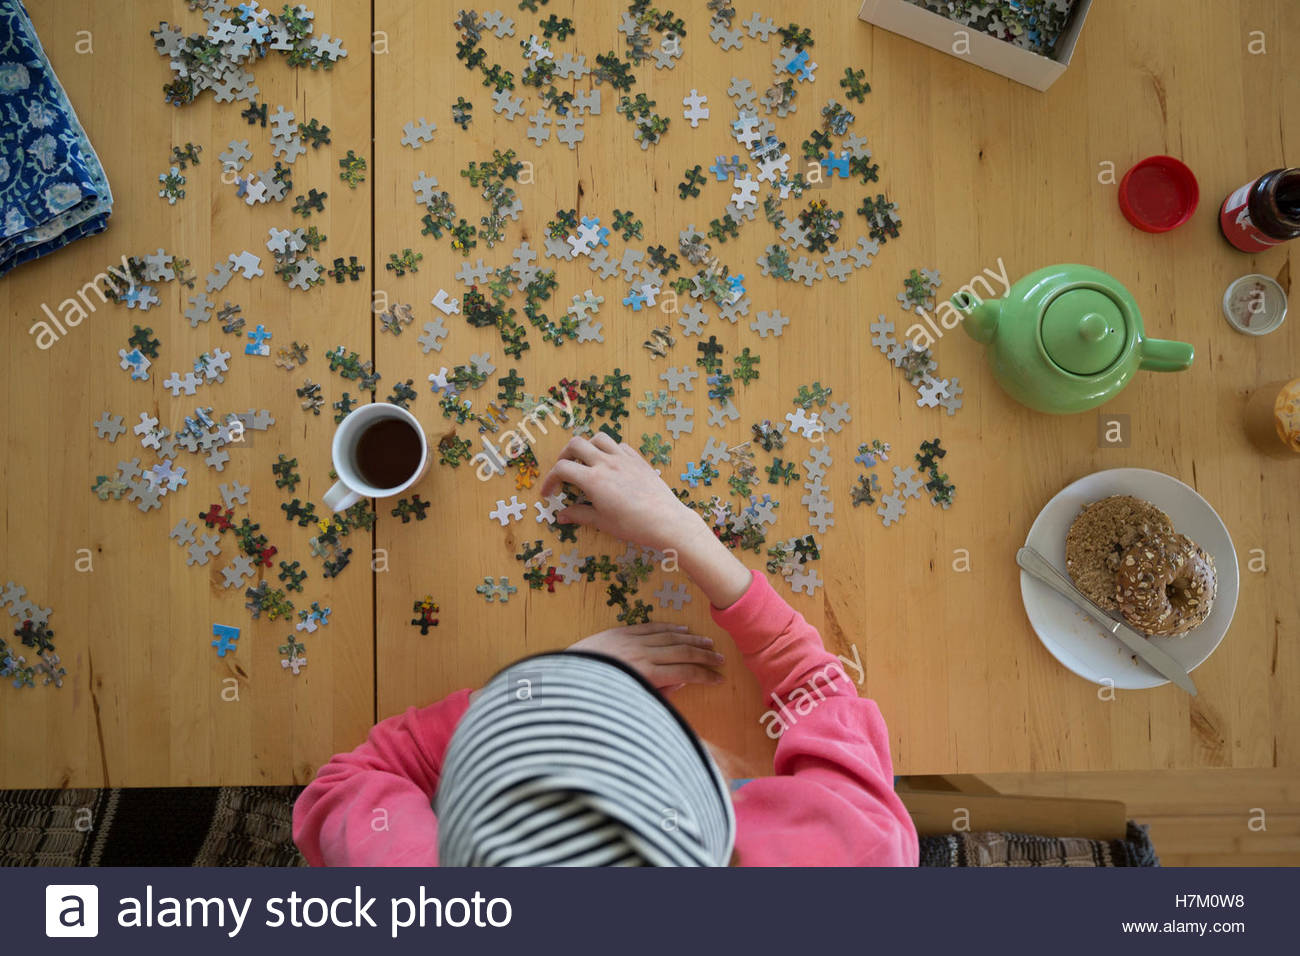 Young woman assembling jigsaw puzzle and drinking coffee at table Stock Photo